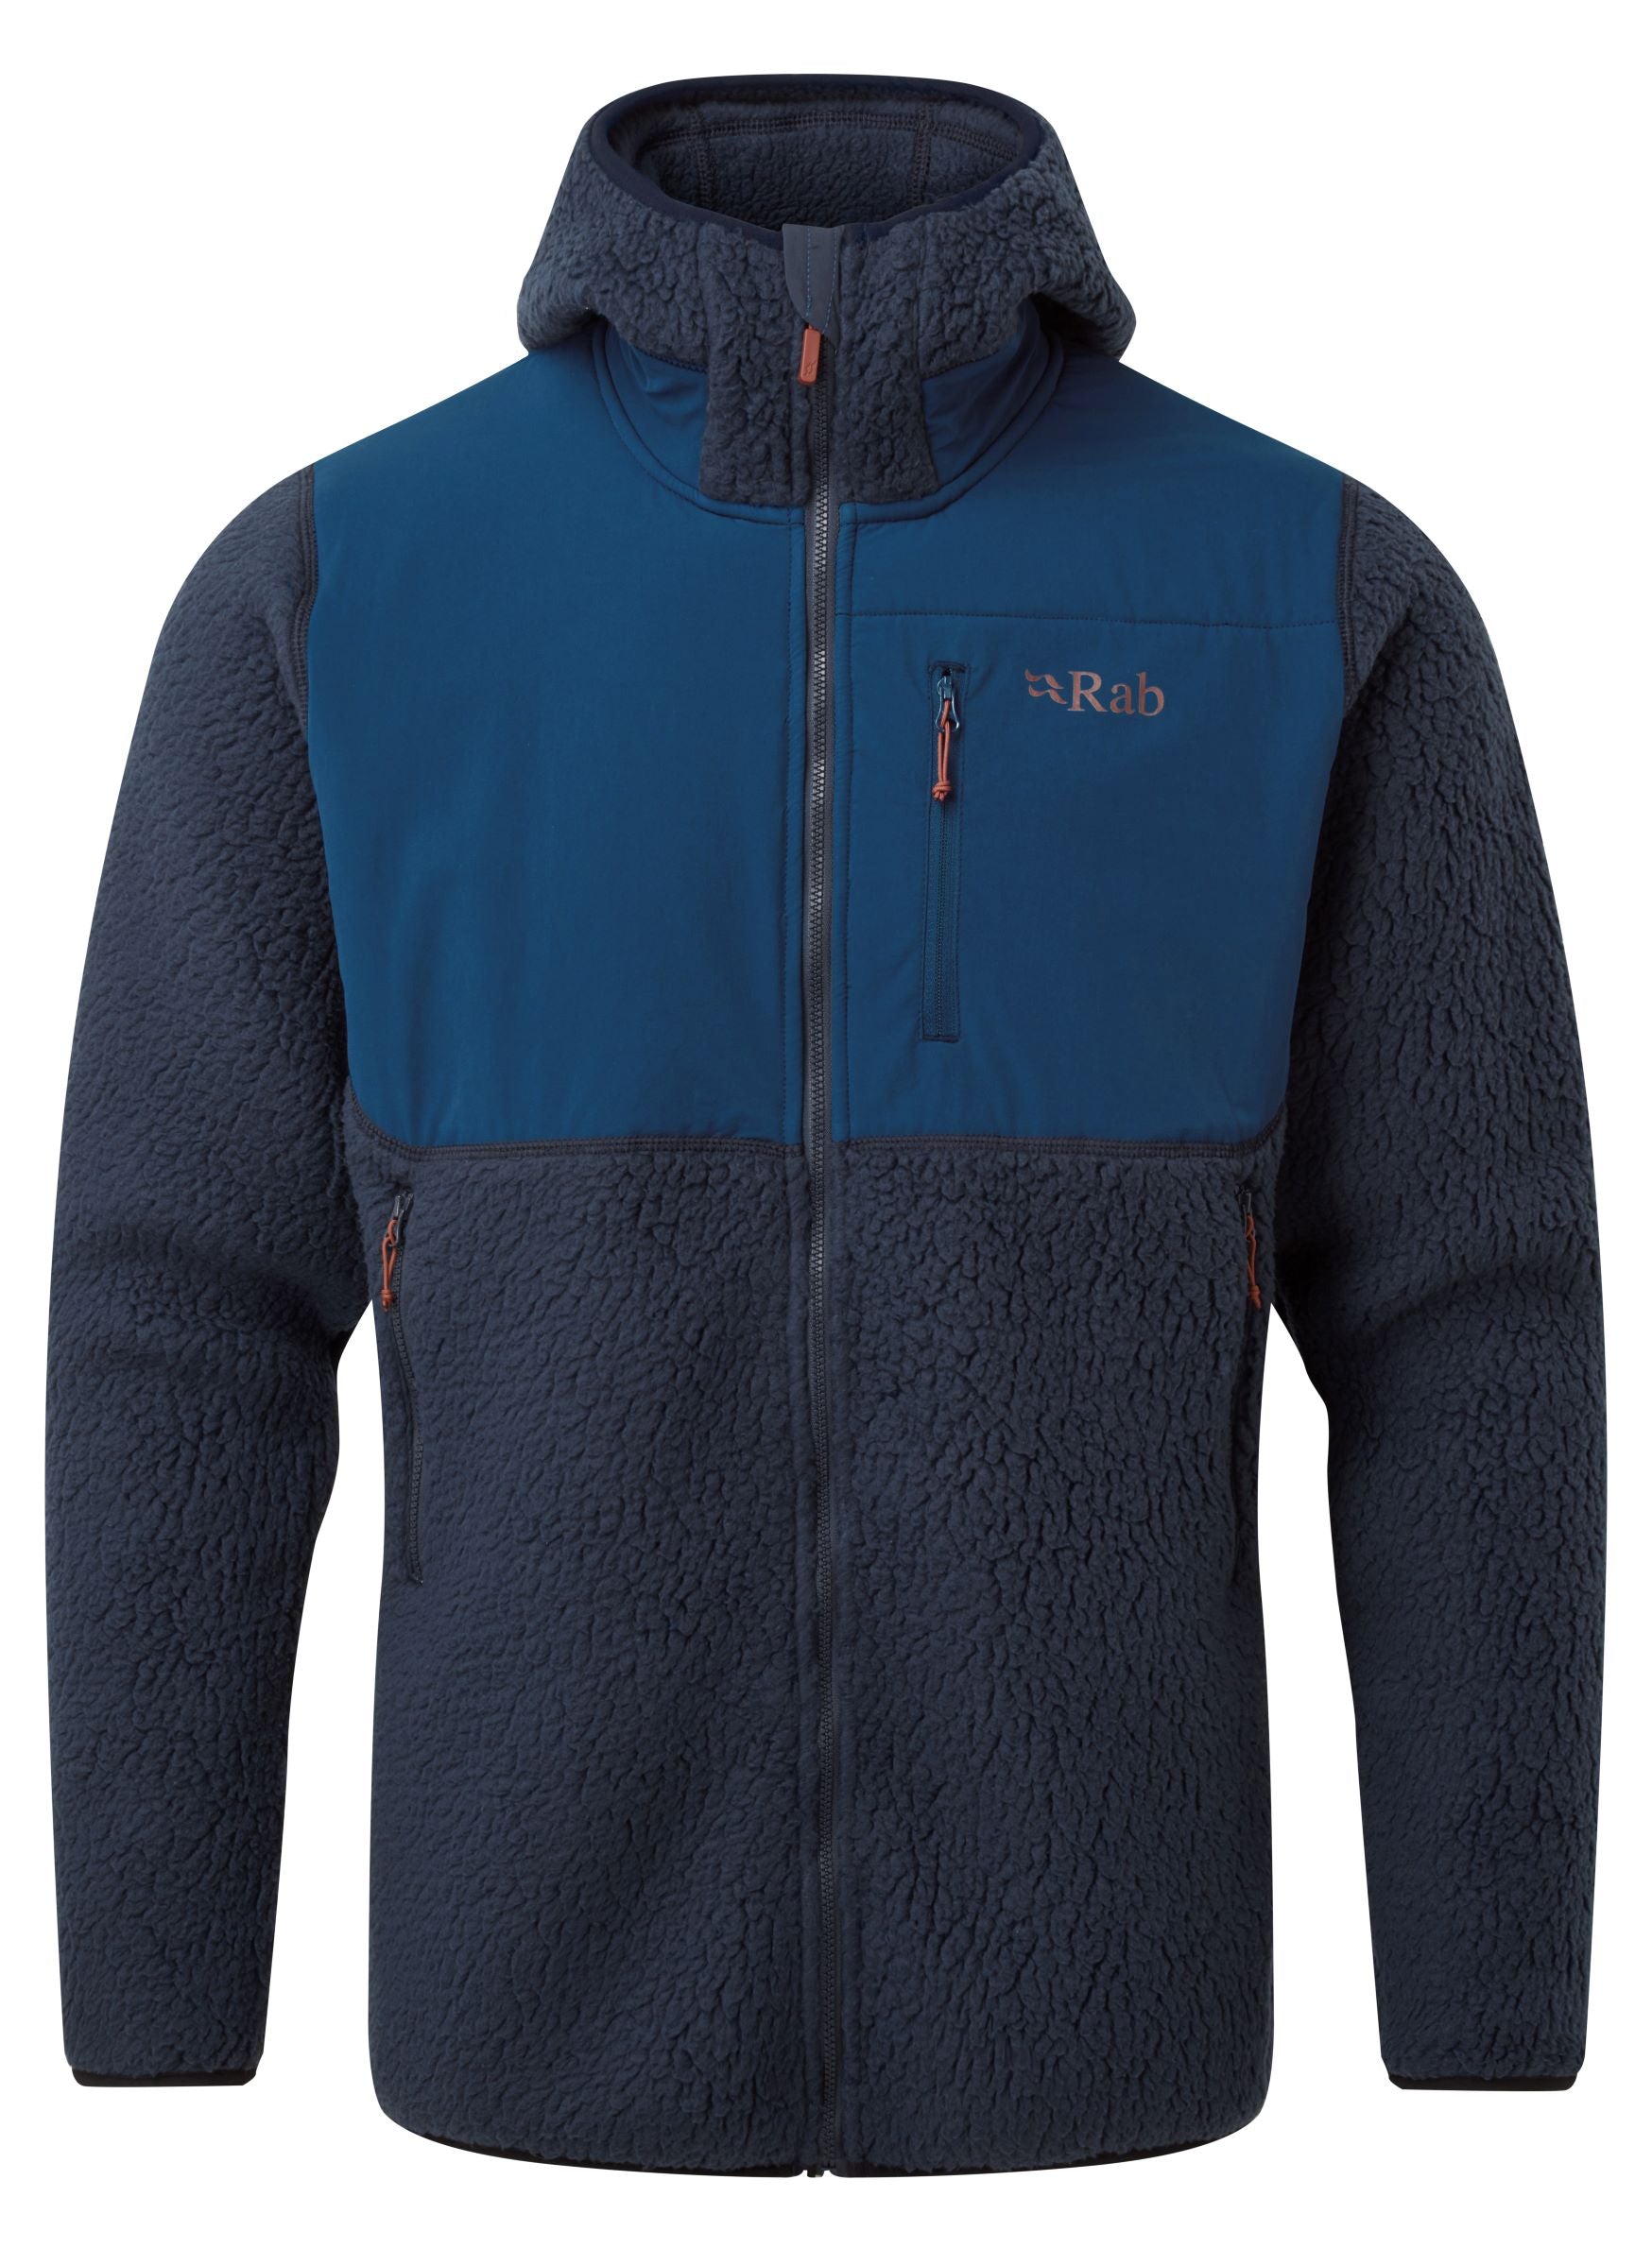 Rab Outpost Jacket - outfittersstore.nz